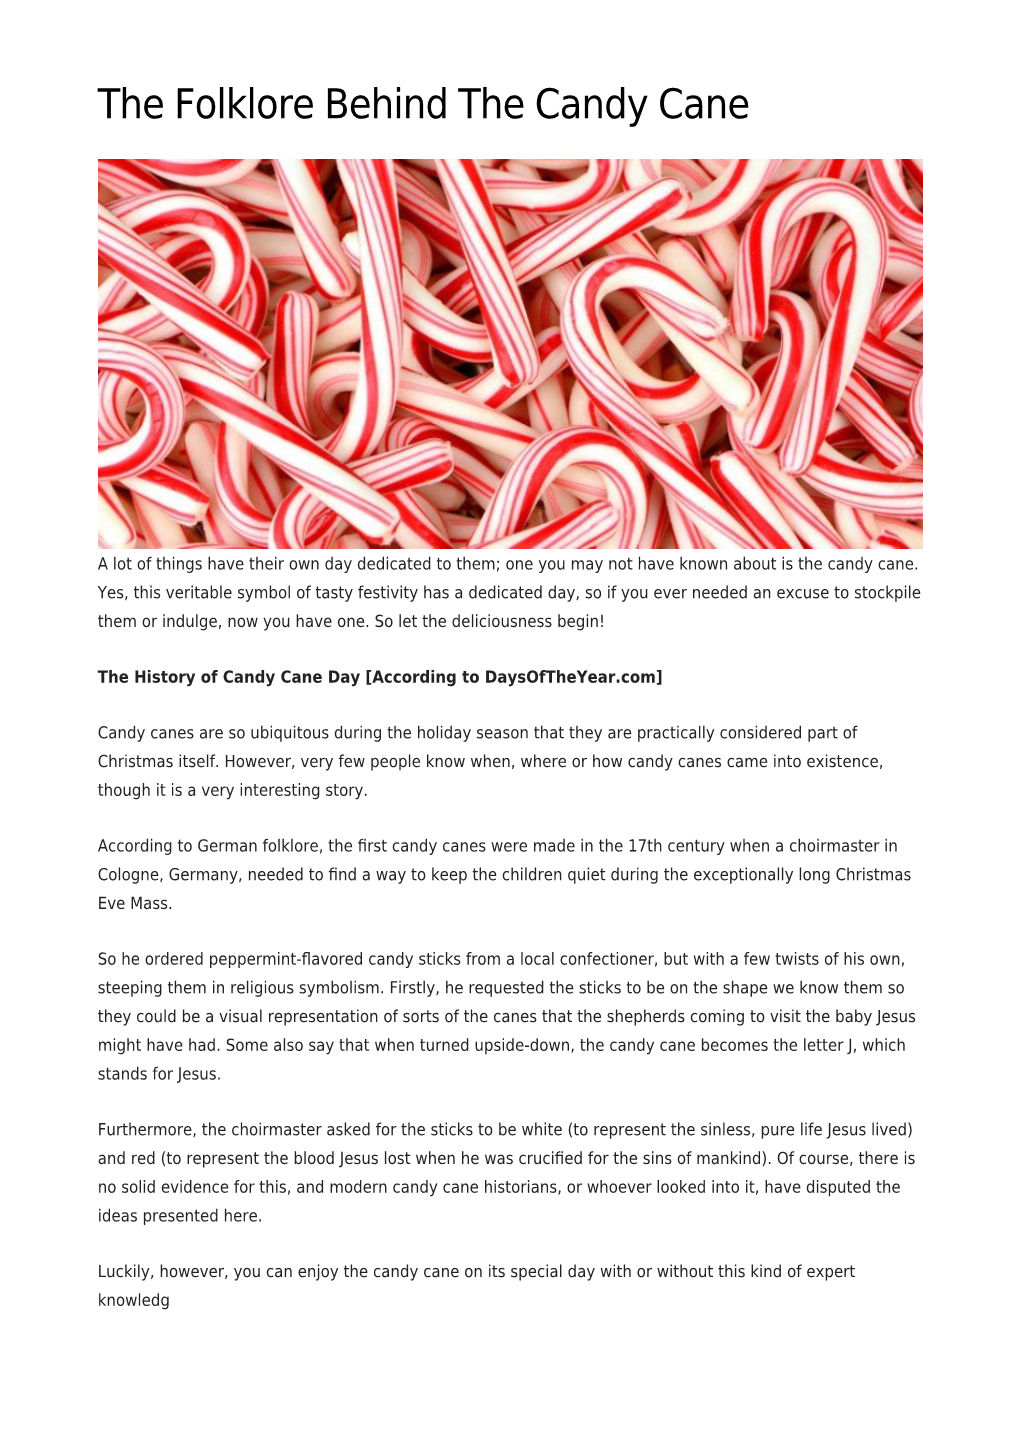 The Folklore Behind the Candy Cane